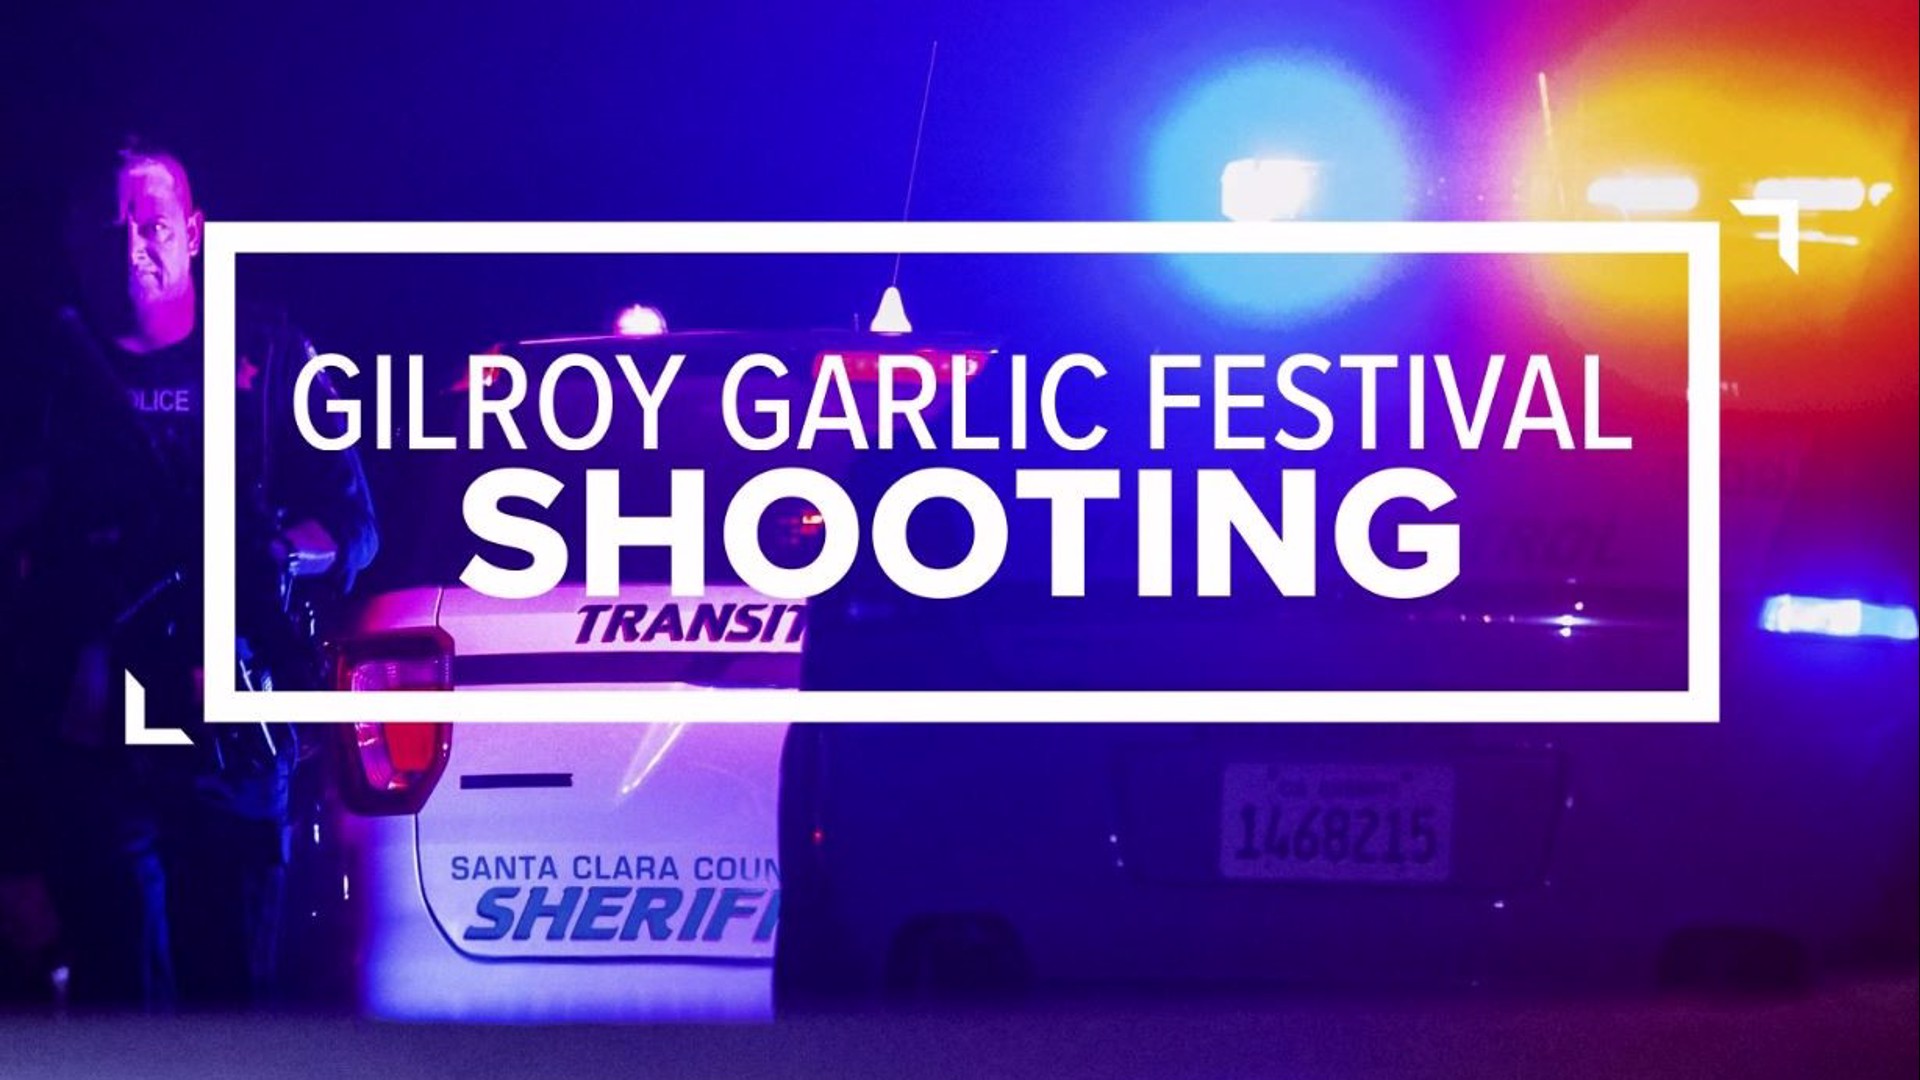 Gilroy Garlic Festival Shooting: Need to Know, Monday evening